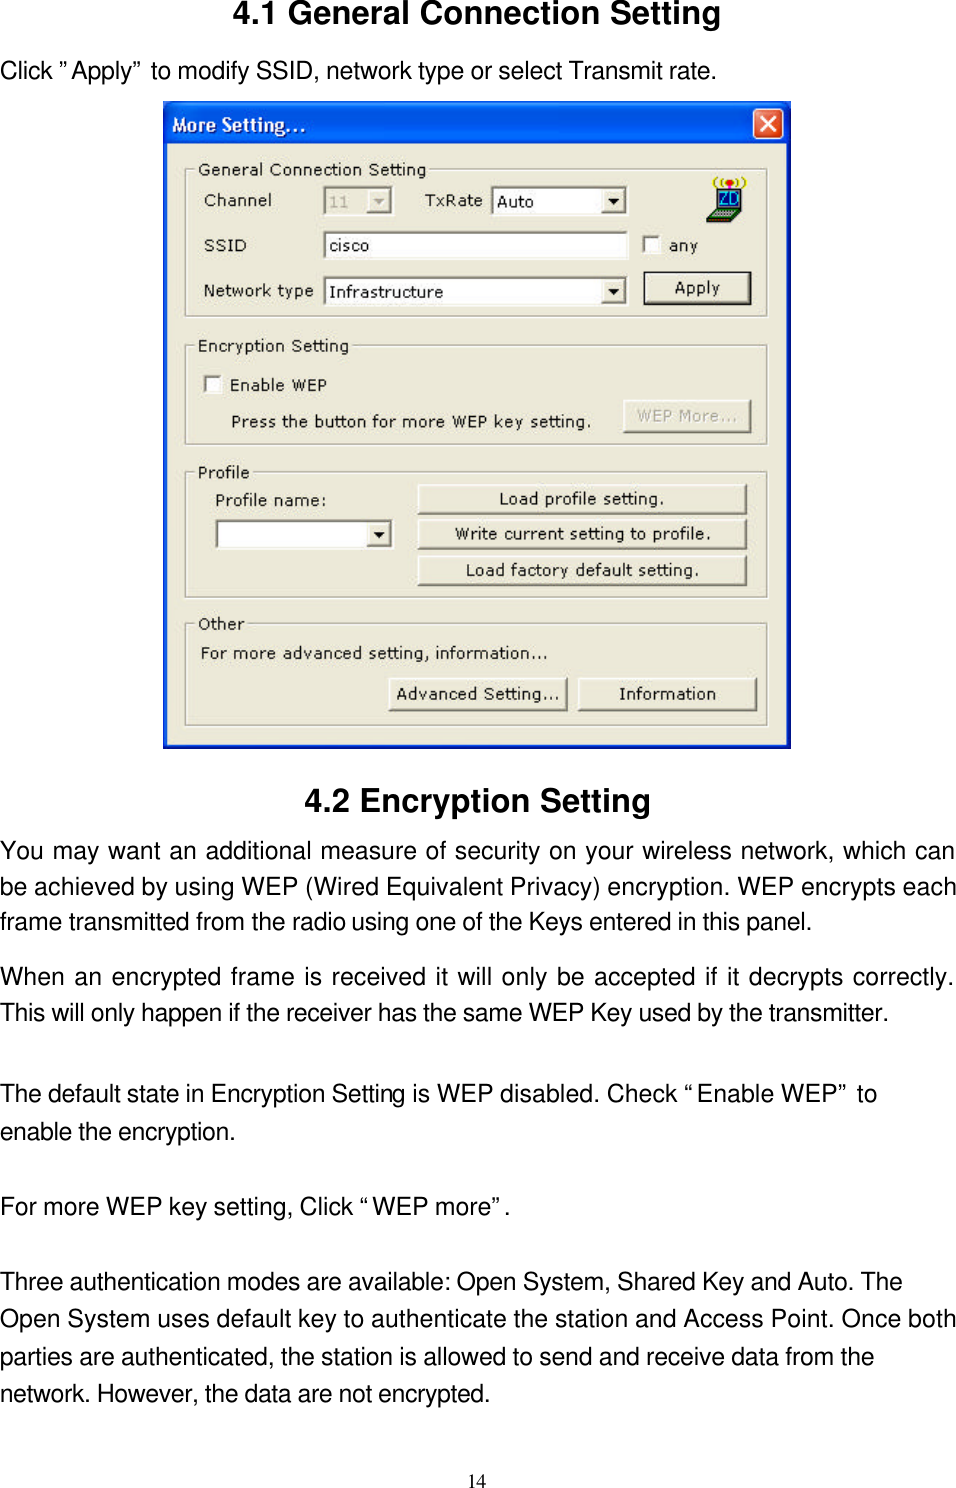  14  4.1 General Connection Setting Click ”Apply” to modify SSID, network type or select Transmit rate.  4.2 Encryption Setting You may want an additional measure of security on your wireless network, which can be achieved by using WEP (Wired Equivalent Privacy) encryption. WEP encrypts each frame transmitted from the radio using one of the Keys entered in this panel.   When an encrypted frame is received it will only be accepted if it decrypts correctly. This will only happen if the receiver has the same WEP Key used by the transmitter.  The default state in Encryption Setting is WEP disabled. Check “Enable WEP” to enable the encryption.  For more WEP key setting, Click “WEP more”.  Three authentication modes are available: Open System, Shared Key and Auto. The Open System uses default key to authenticate the station and Access Point. Once both parties are authenticated, the station is allowed to send and receive data from the network. However, the data are not encrypted.    